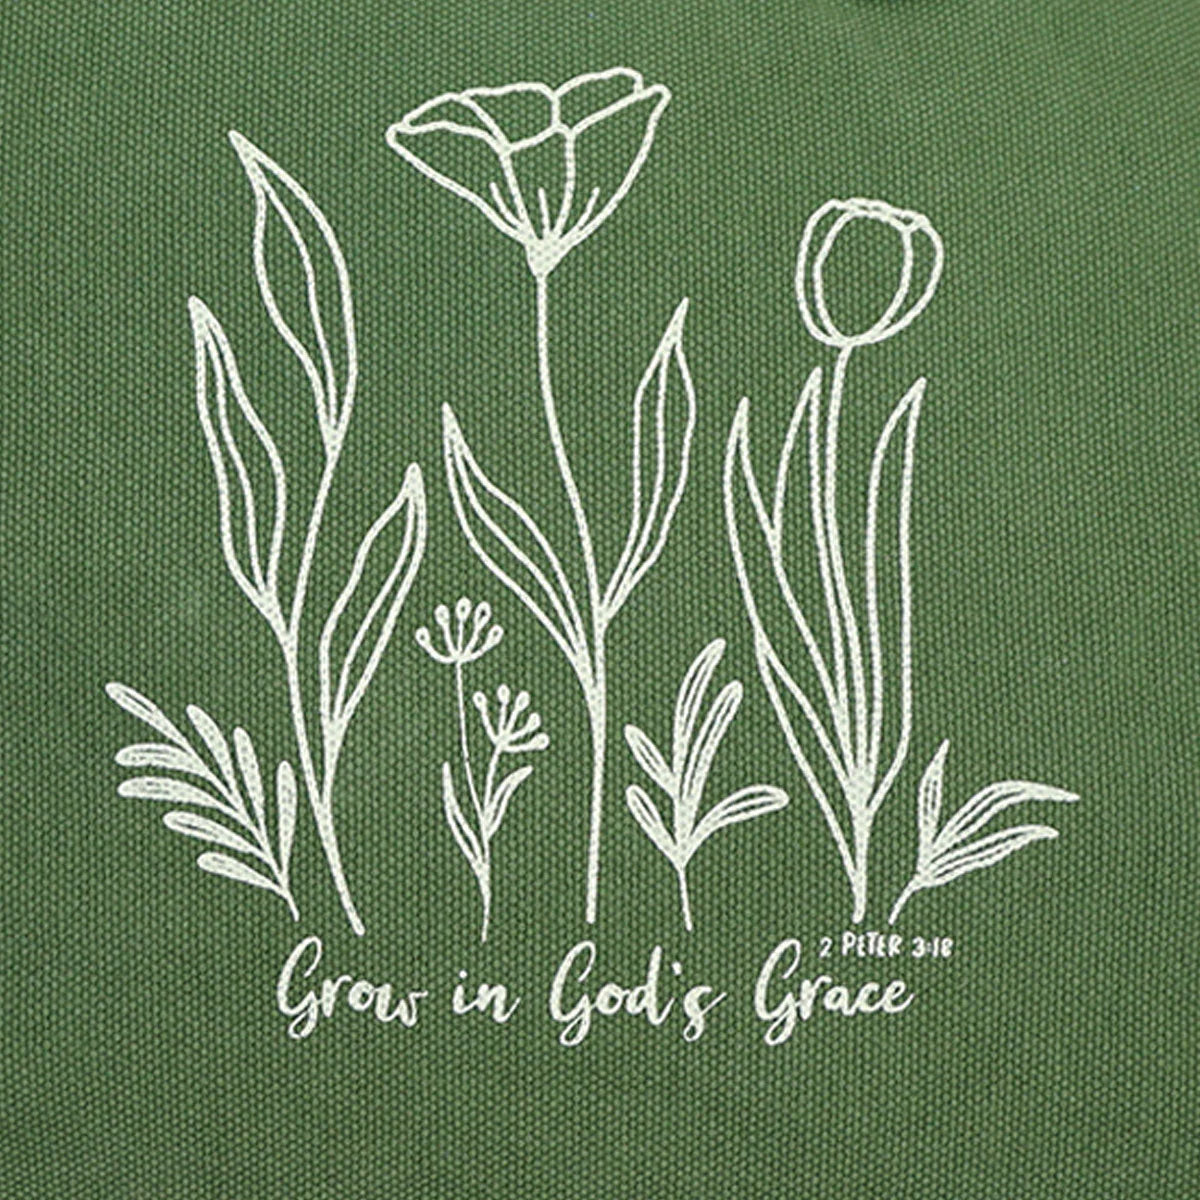 grace & truth Tote Bag Grow In God's Grace grace & truth® accessories Bags Women's